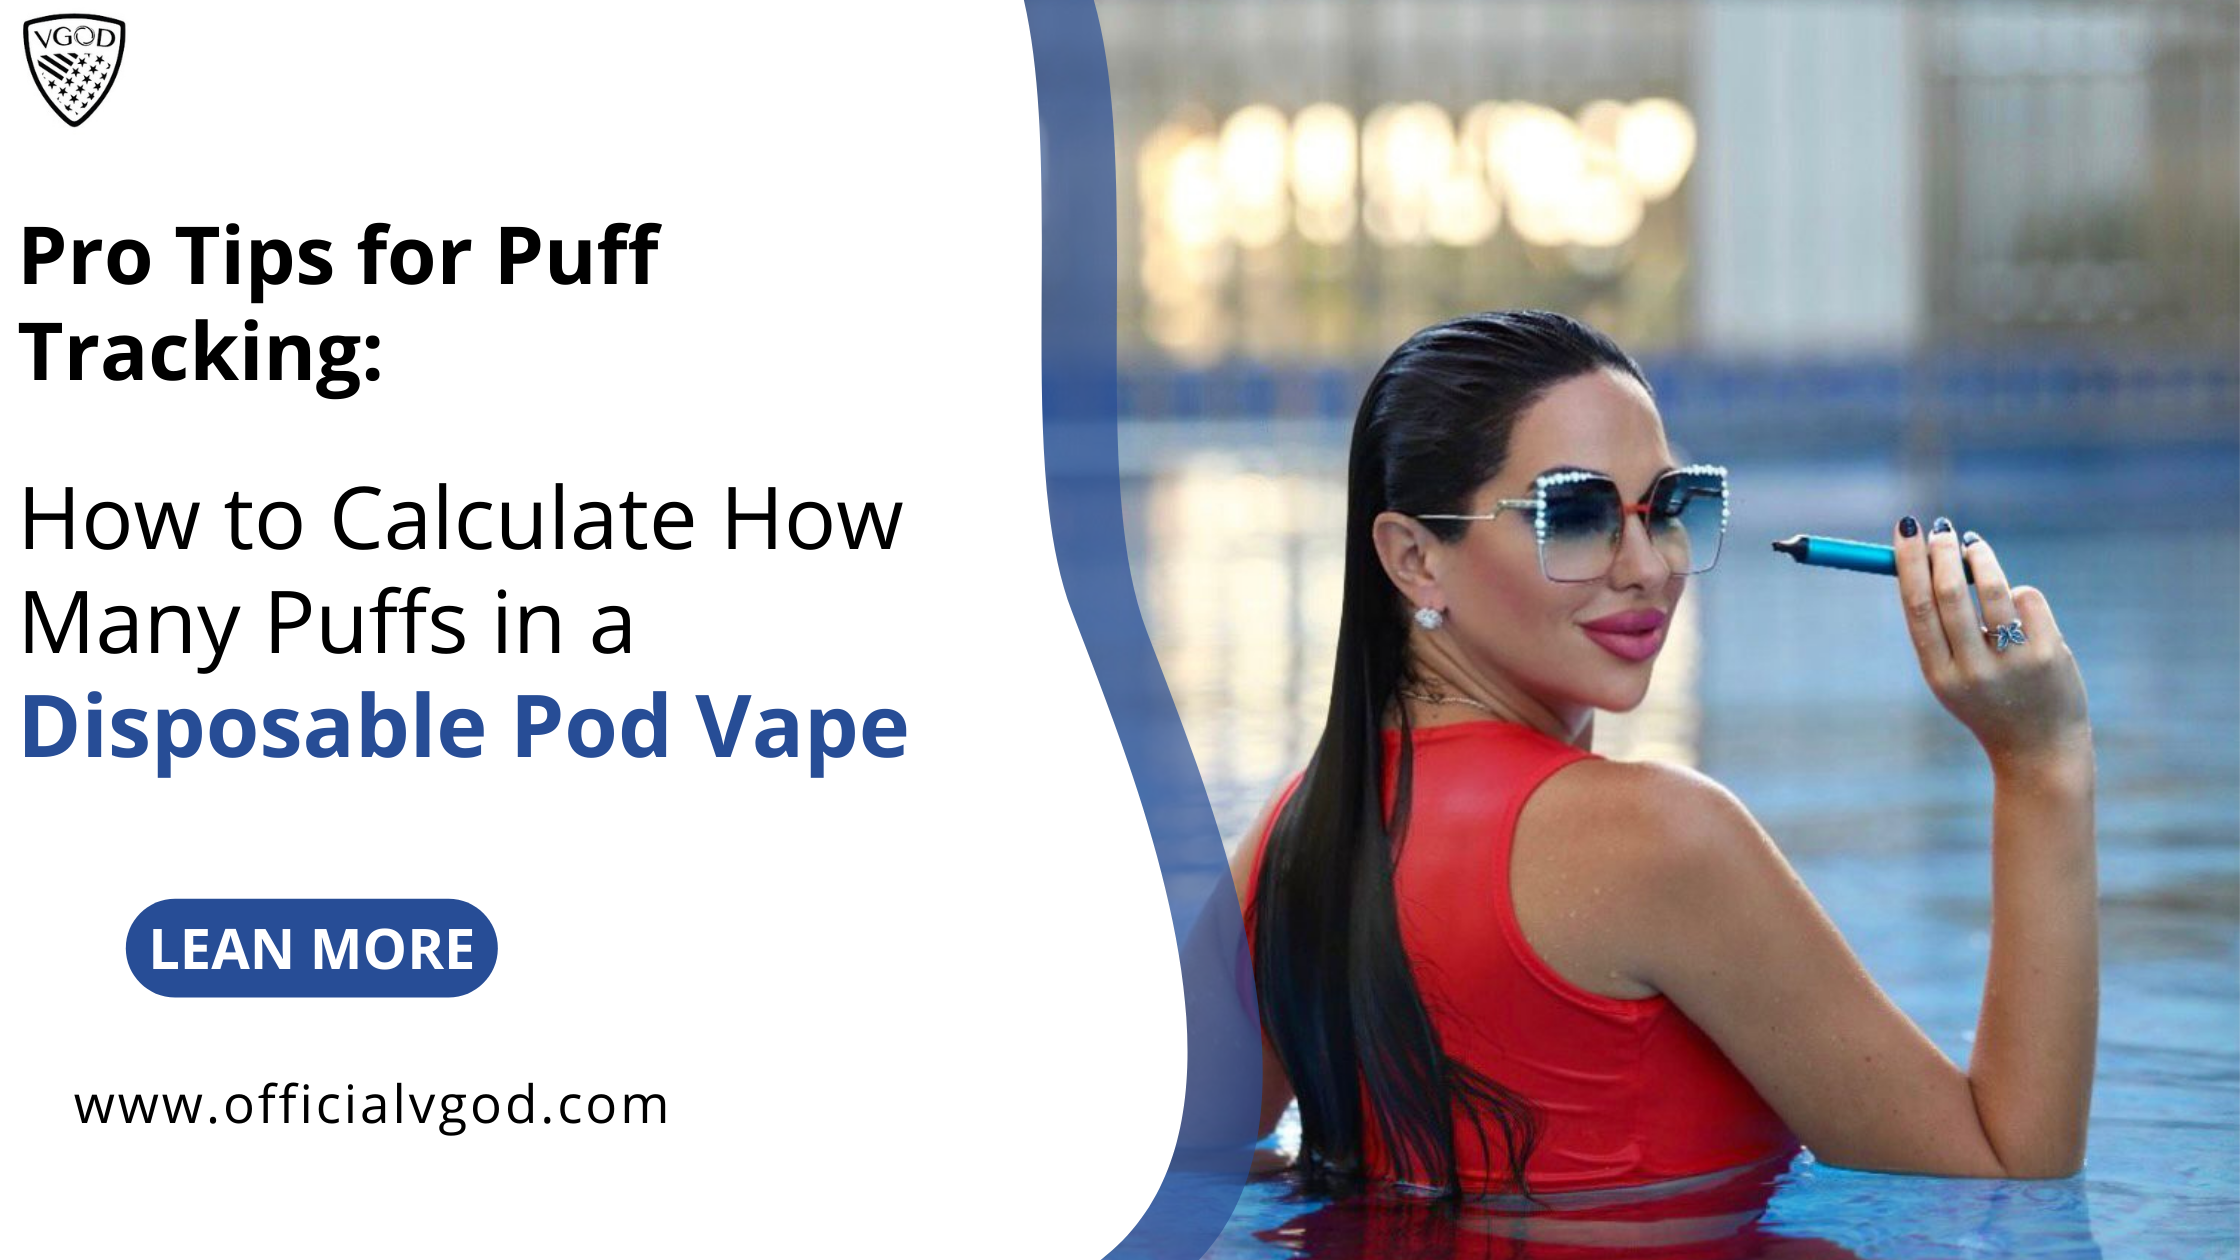 Pro Tips for Puff Tracking: How to Calculate How Many Puffs in a Disposable Pod Vape